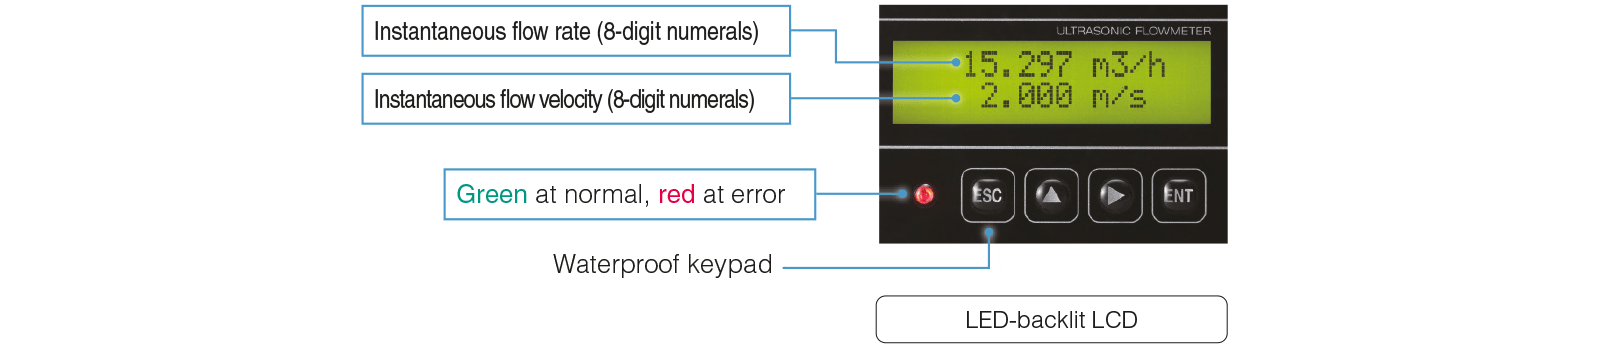 accessible operator interface schematic